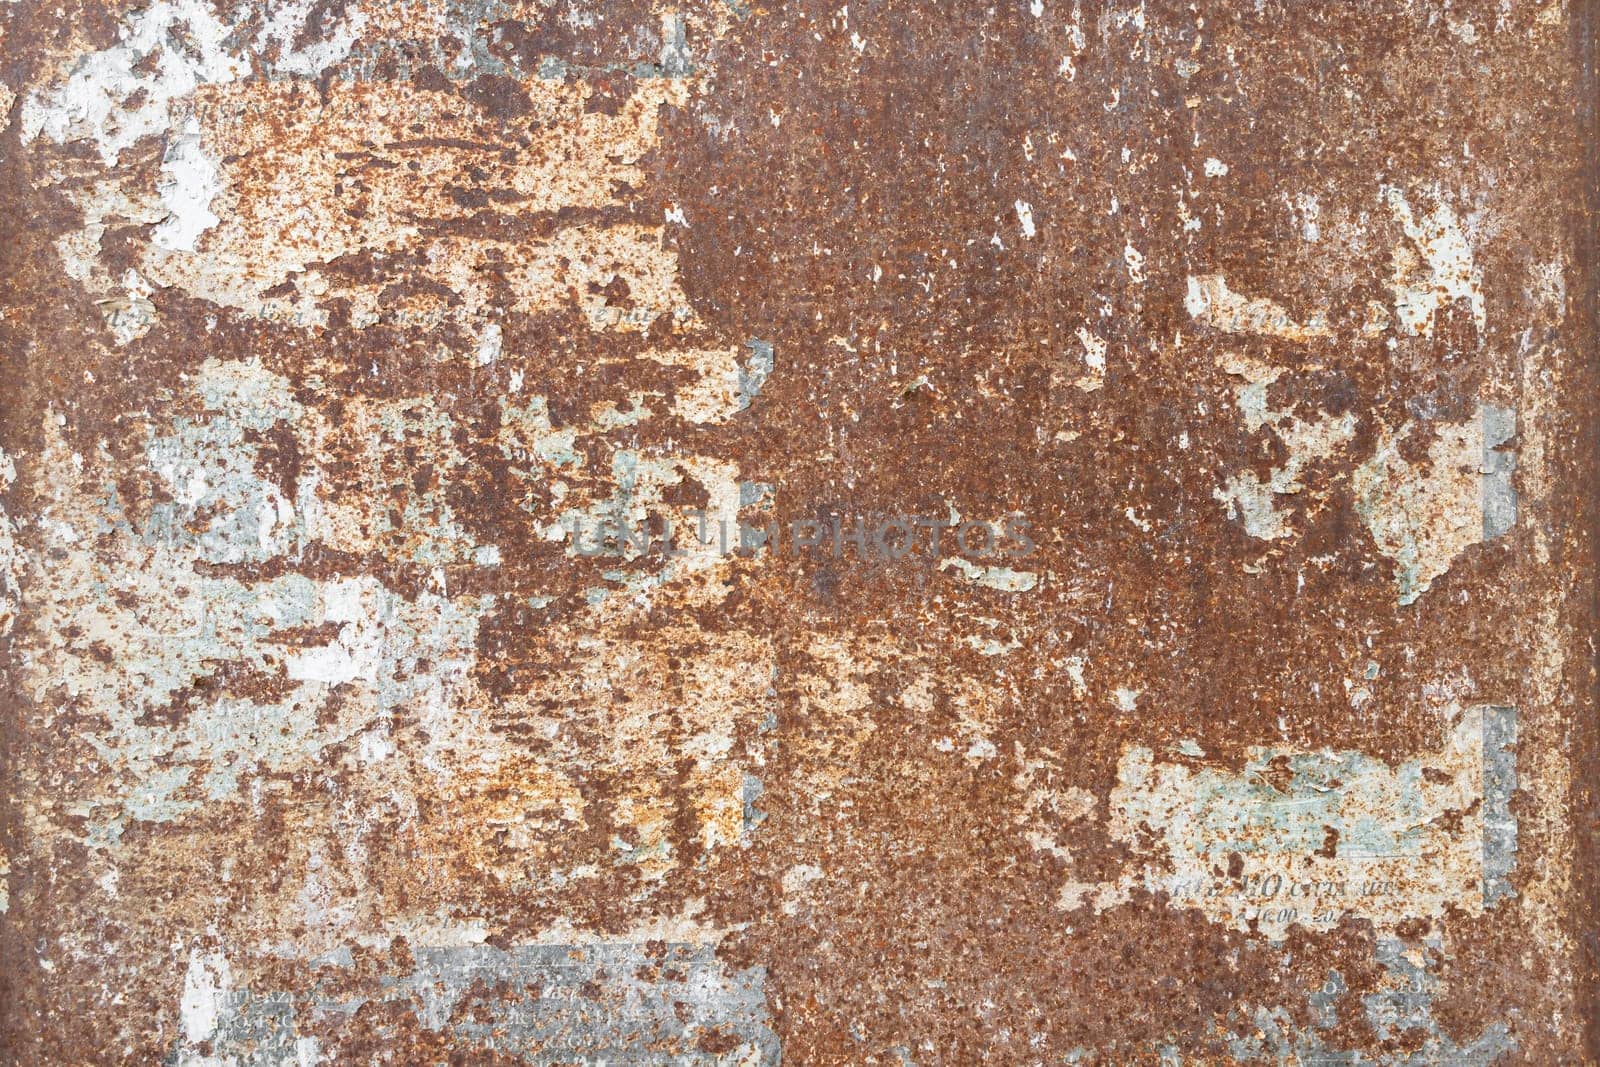 Grunge rusty metal texture, rust and oxidized metal background. Old iron panel.